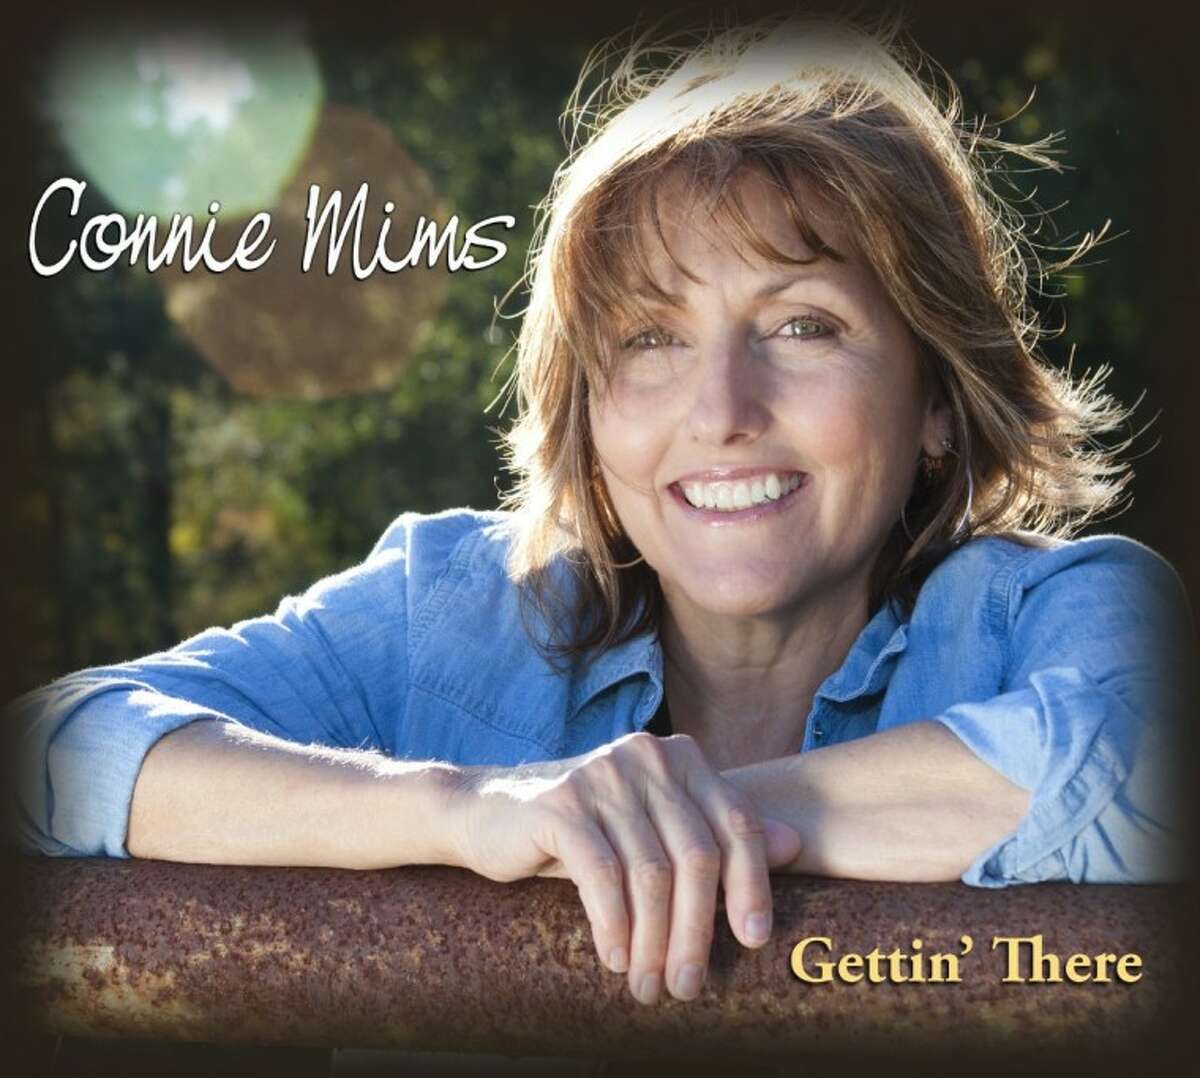 Connie Mims’ “Gettin’ There” will be available at various online music outlets and on Mims’s website, beginning Dec. 4.